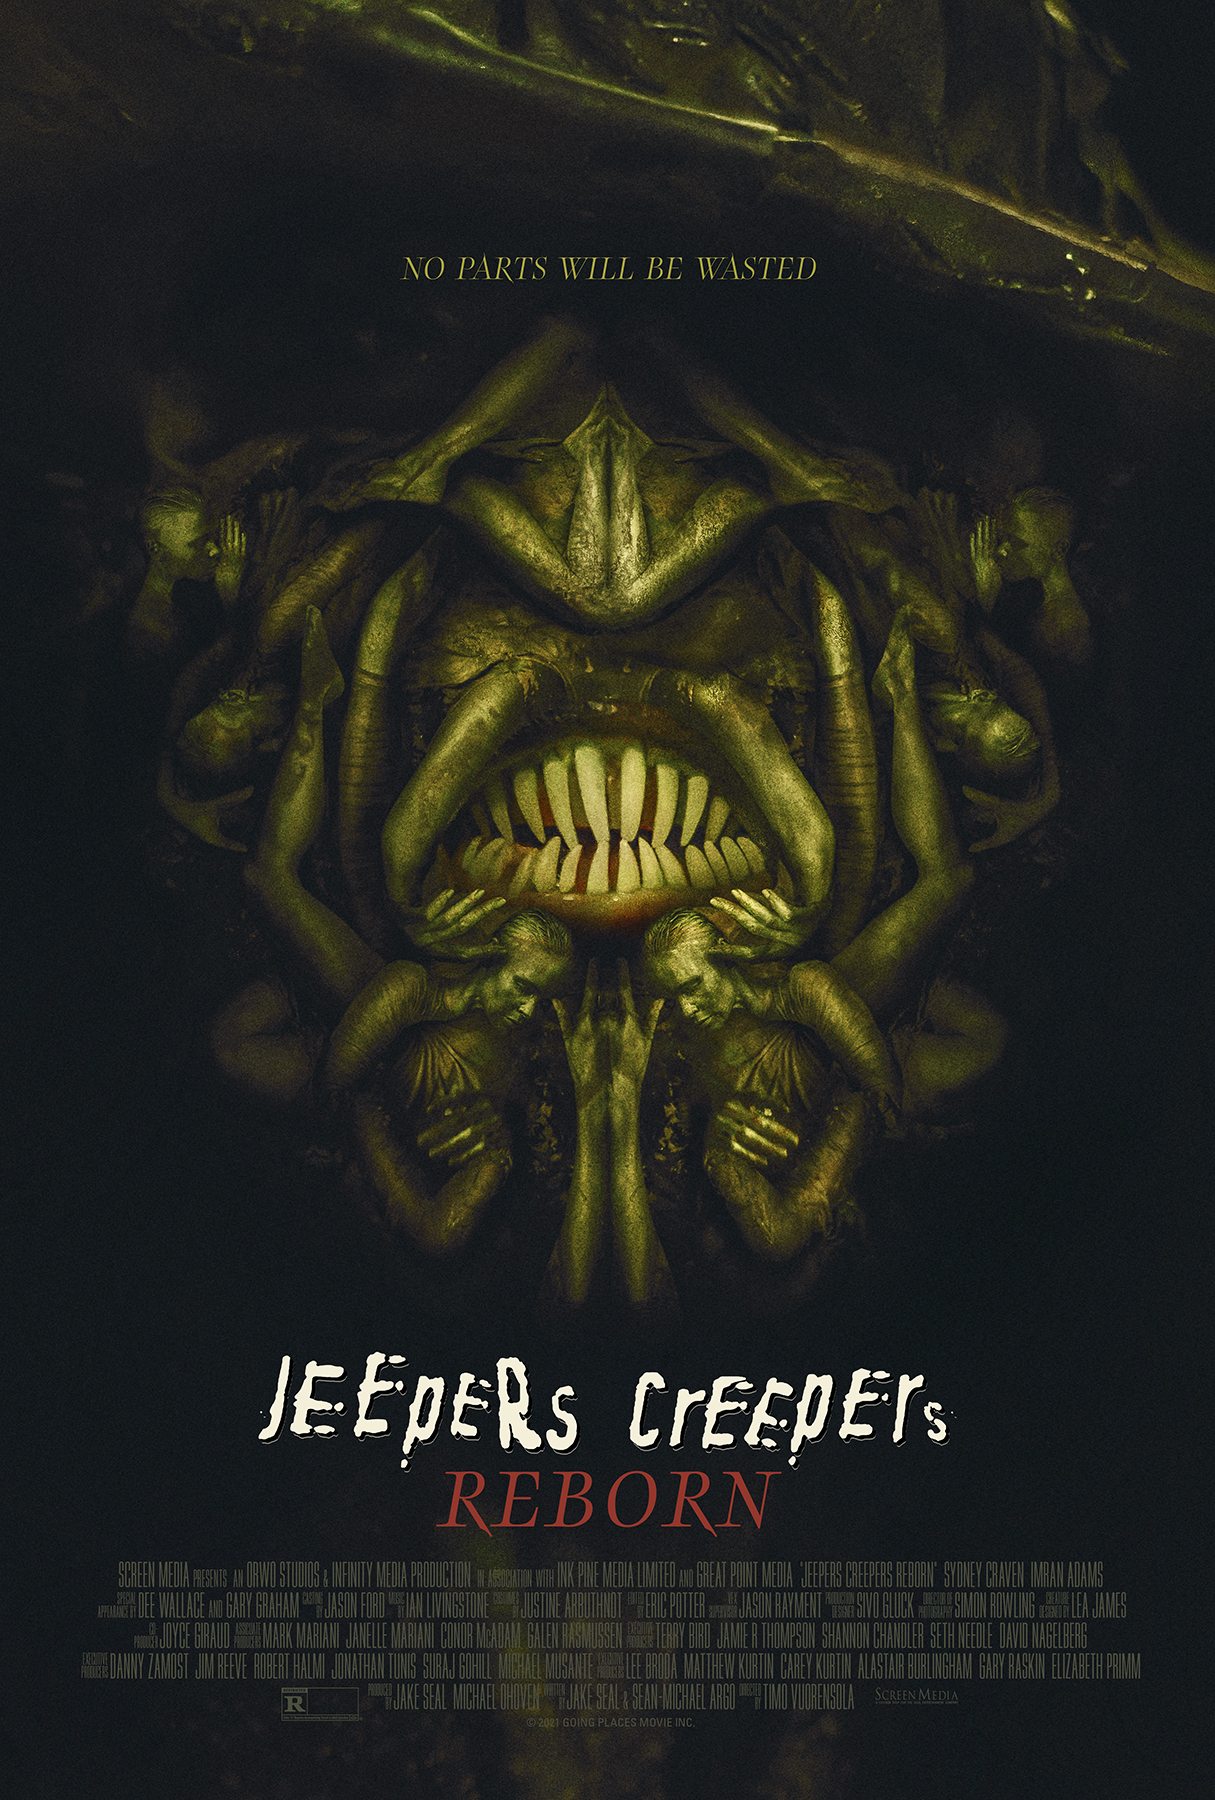 Jeepers creepers reborn free download balloon fight game download